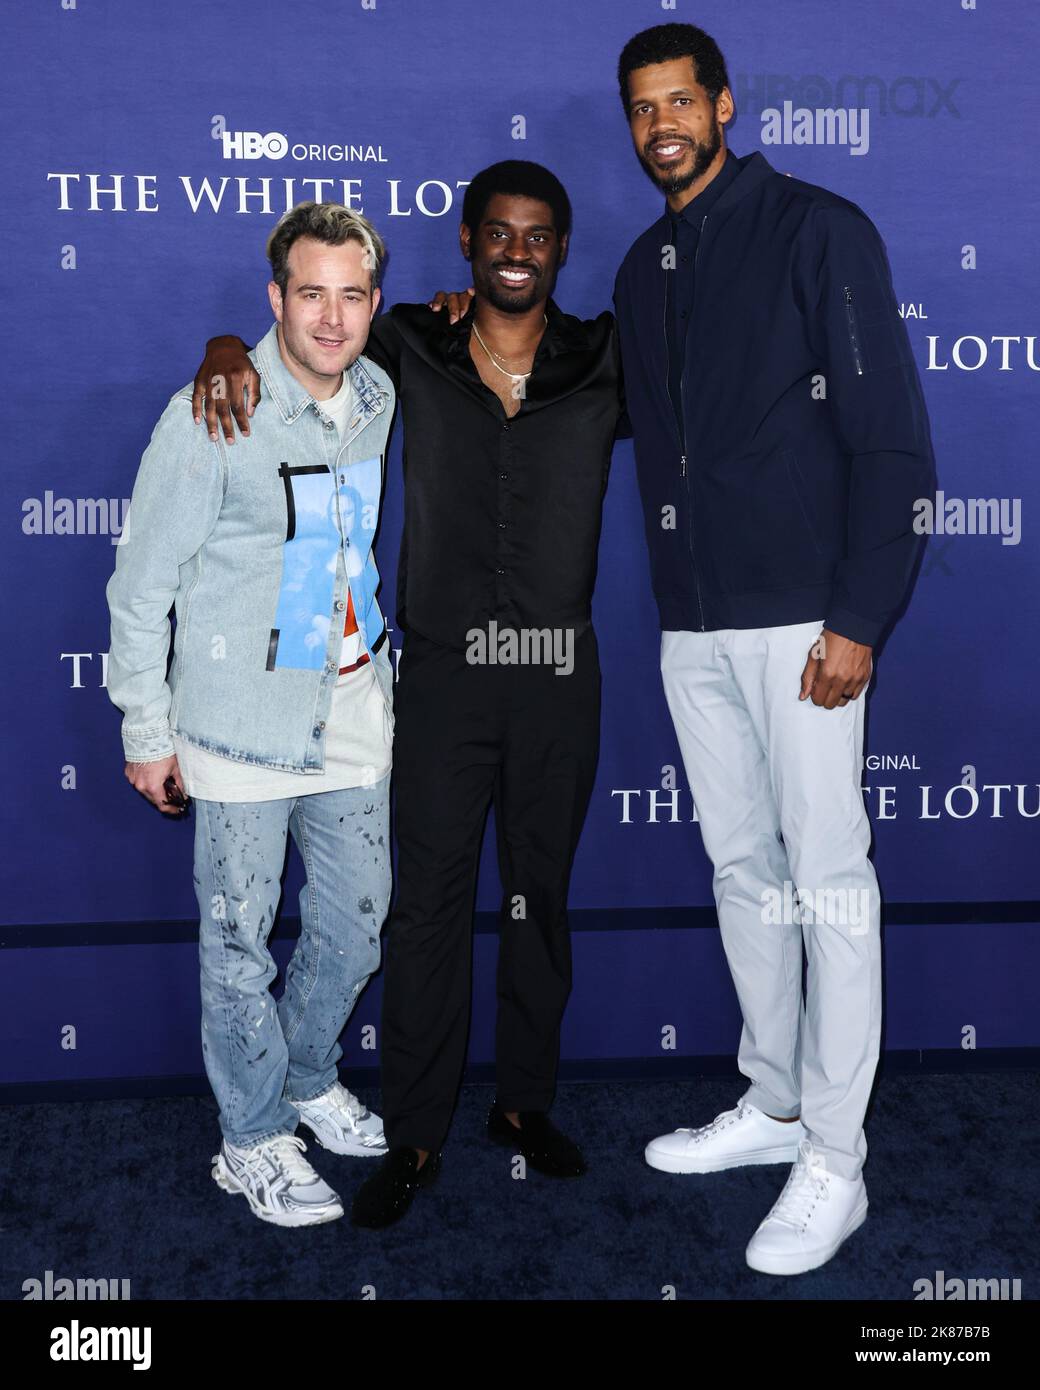 Hollywood, USA. 20th Oct, 2022. HOLLYWOOD, LOS ANGELES, CALIFORNIA, USA - OCTOBER 20: Max Borenstein, Delante Desouza and Solomon Hughes arrive at the Los Angeles Premiere Of HBO's Original Series 'The White Lotus' Season 2 held at Goya Studios on October 20, 2022 in Hollywood, Los Angeles, California, USA. (Photo by David Acosta/Image Press Agency) Credit: Image Press Agency/Alamy Live News Stock Photo